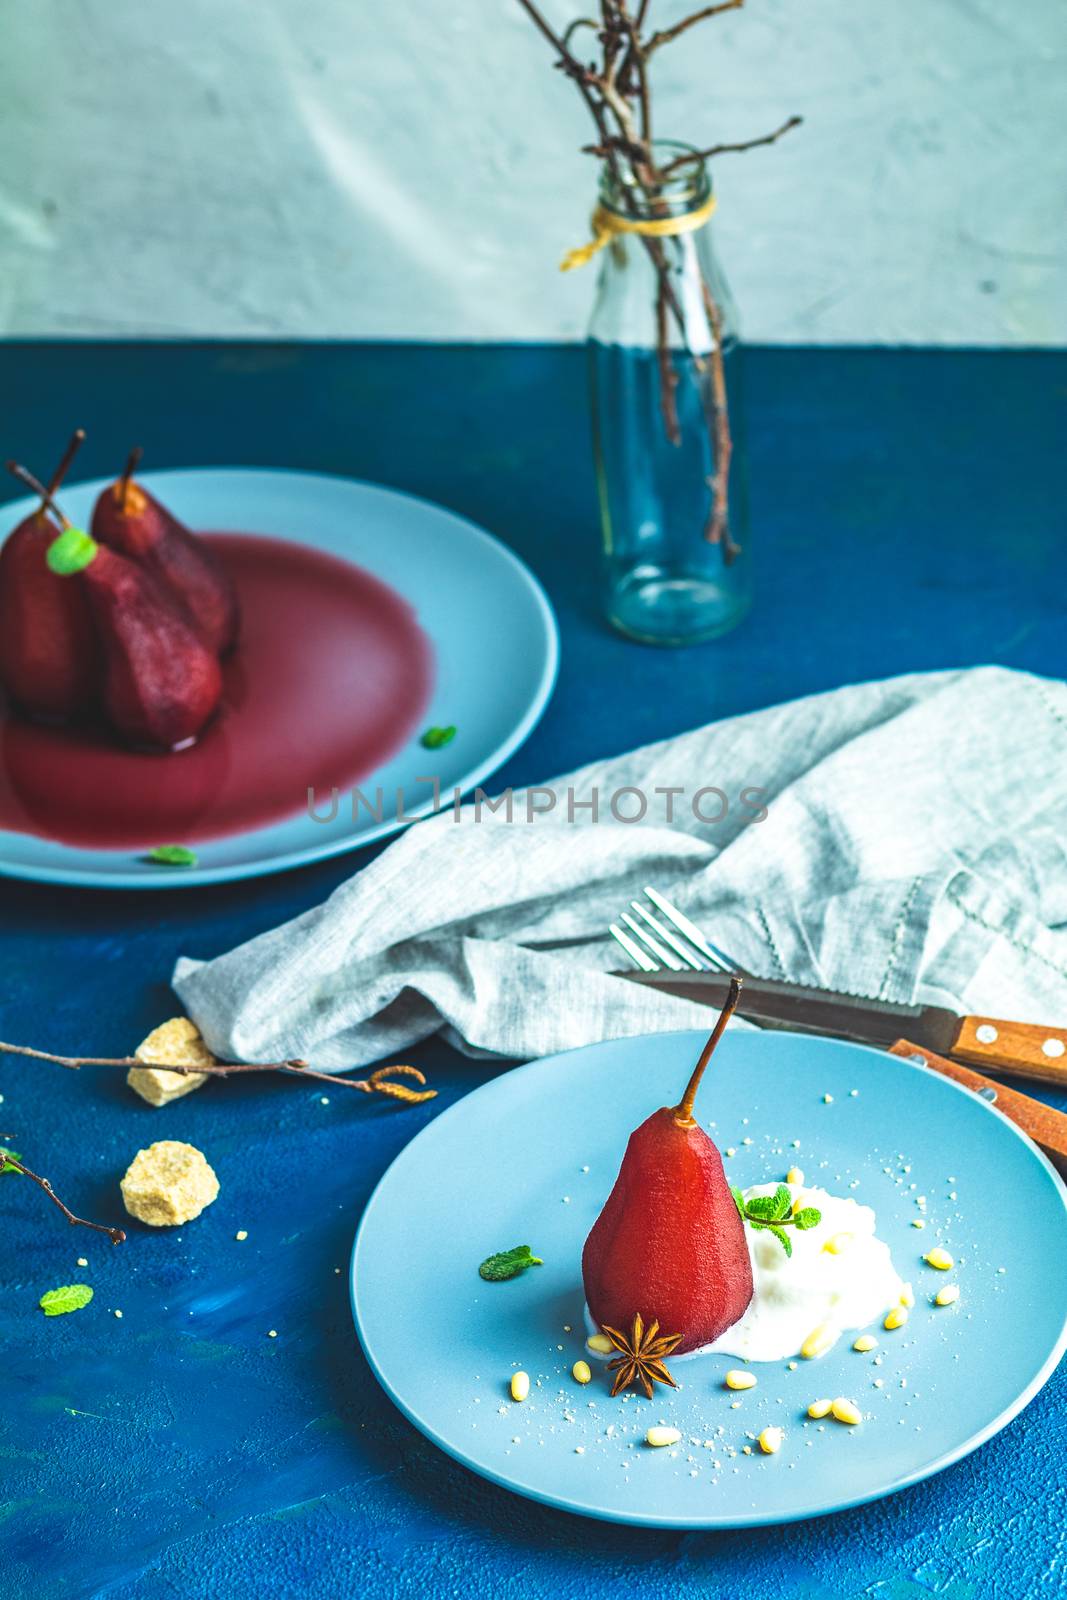 Pears in wine. Traditional dessert pears stewed in red wine with chocolate sauce on plate on blue concrete surface. Concept for romantic dinner dessert. Simple Paleo style dessert pear